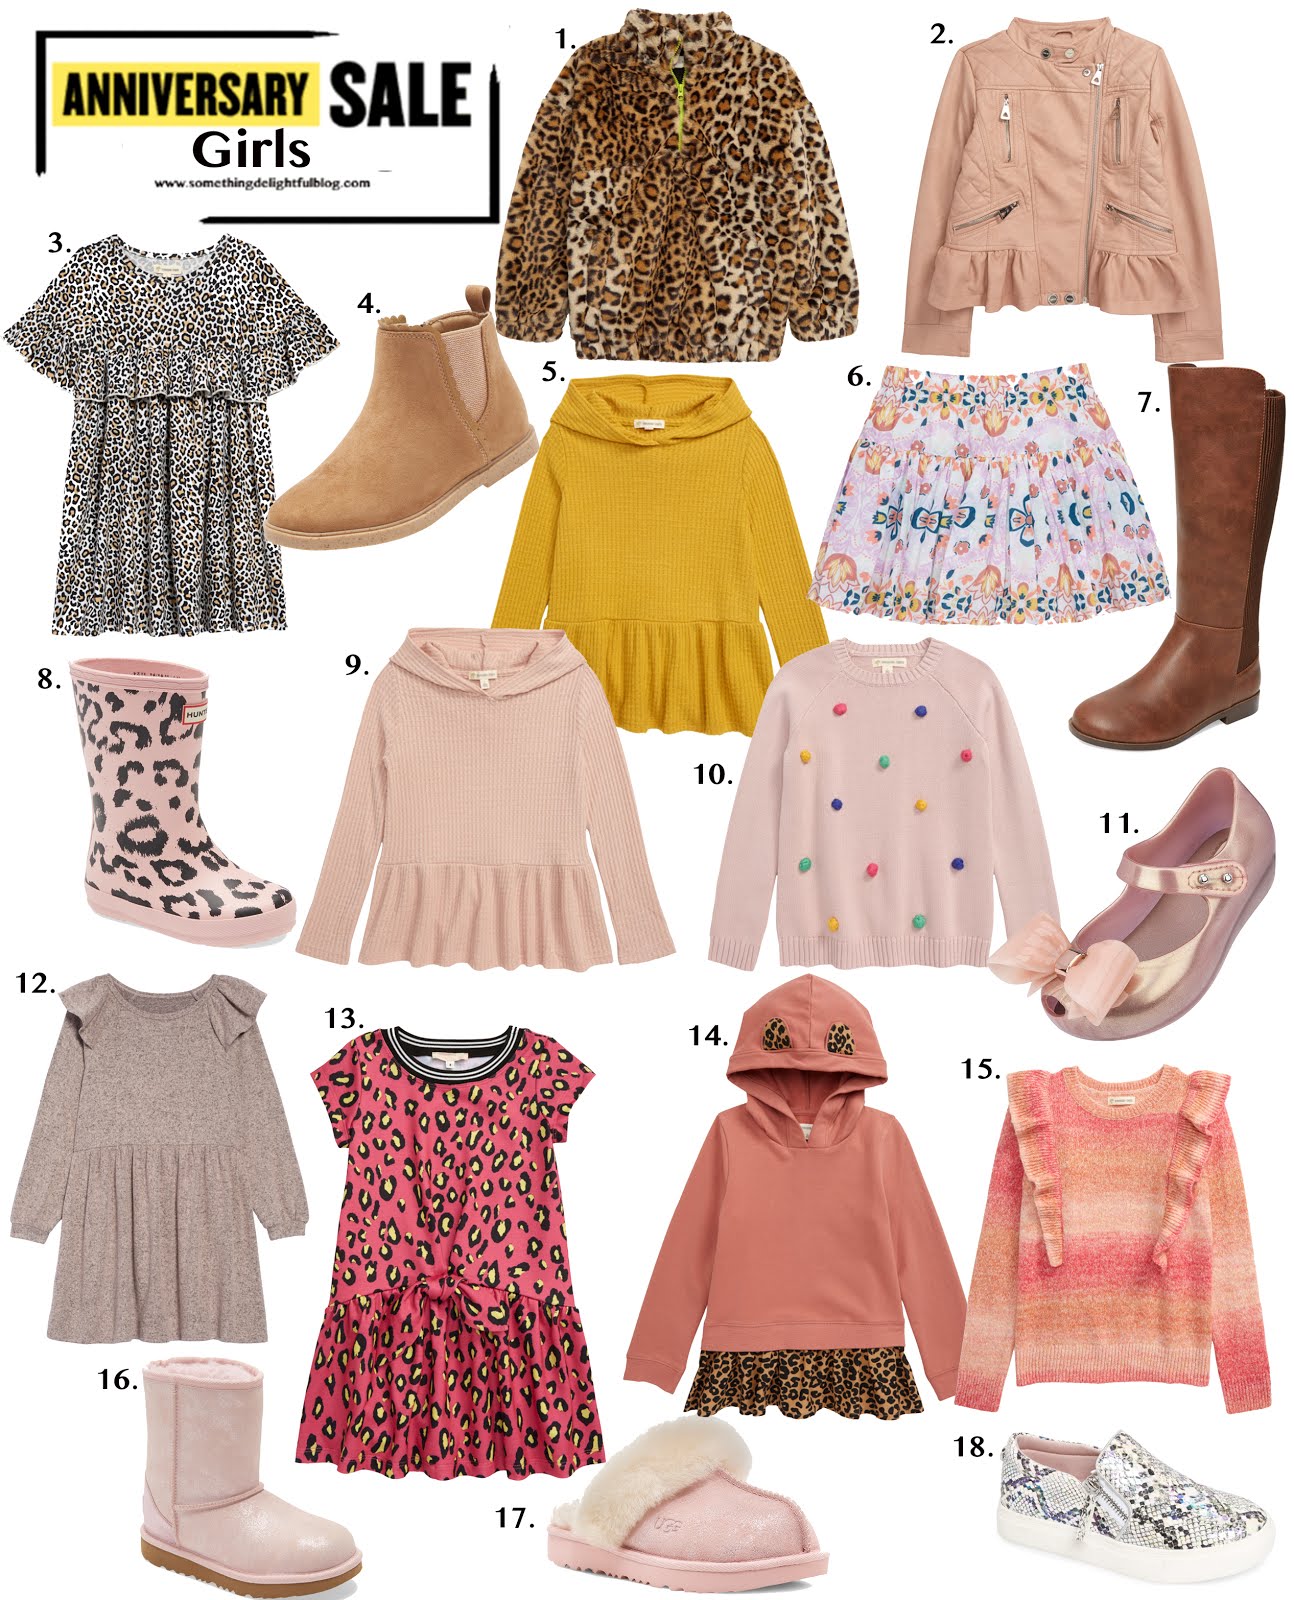 Nordstrom Anniversary Sale 2020: Sale Details + Picks in Every Category - Something Delightful Blog #NSale #NSale2020 #NordstromAnniversarySale #FallStyle2020